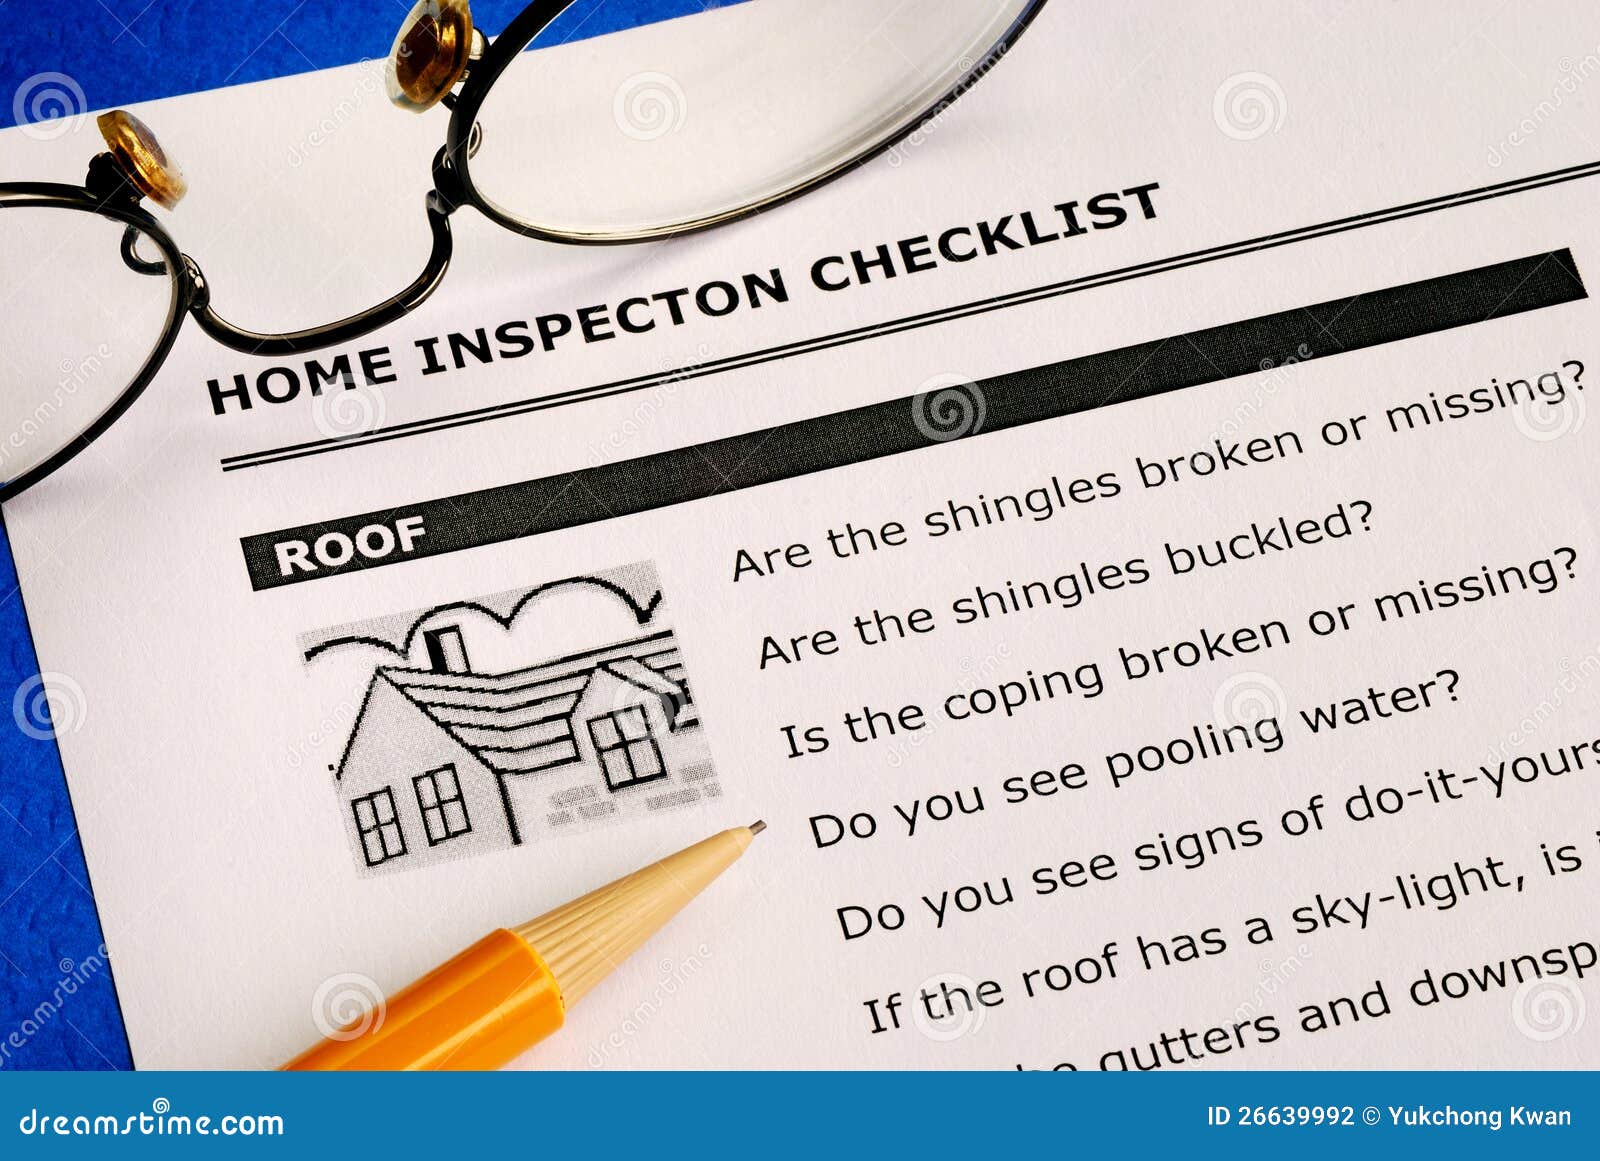 real estate home inspection checklist